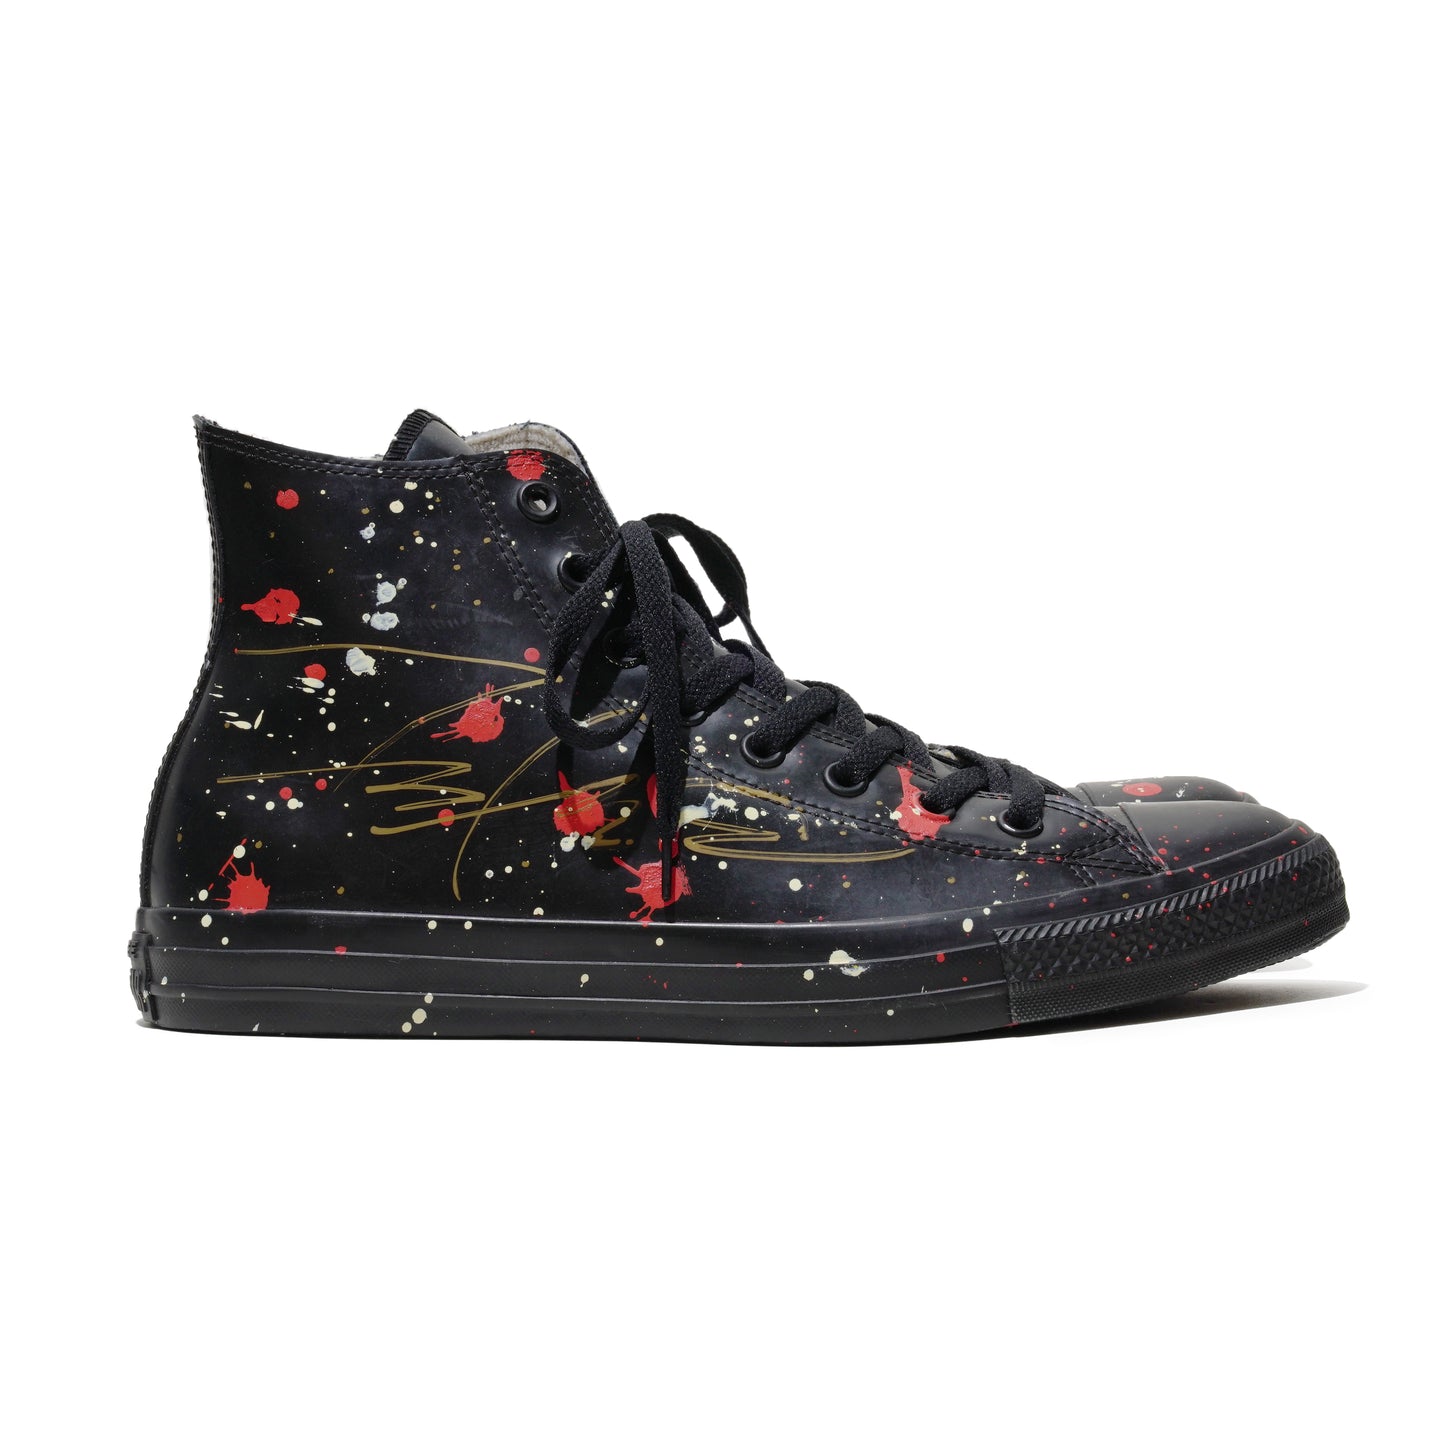 Converse Autographed Chuck Taylor All Star Splash Ink by Futura